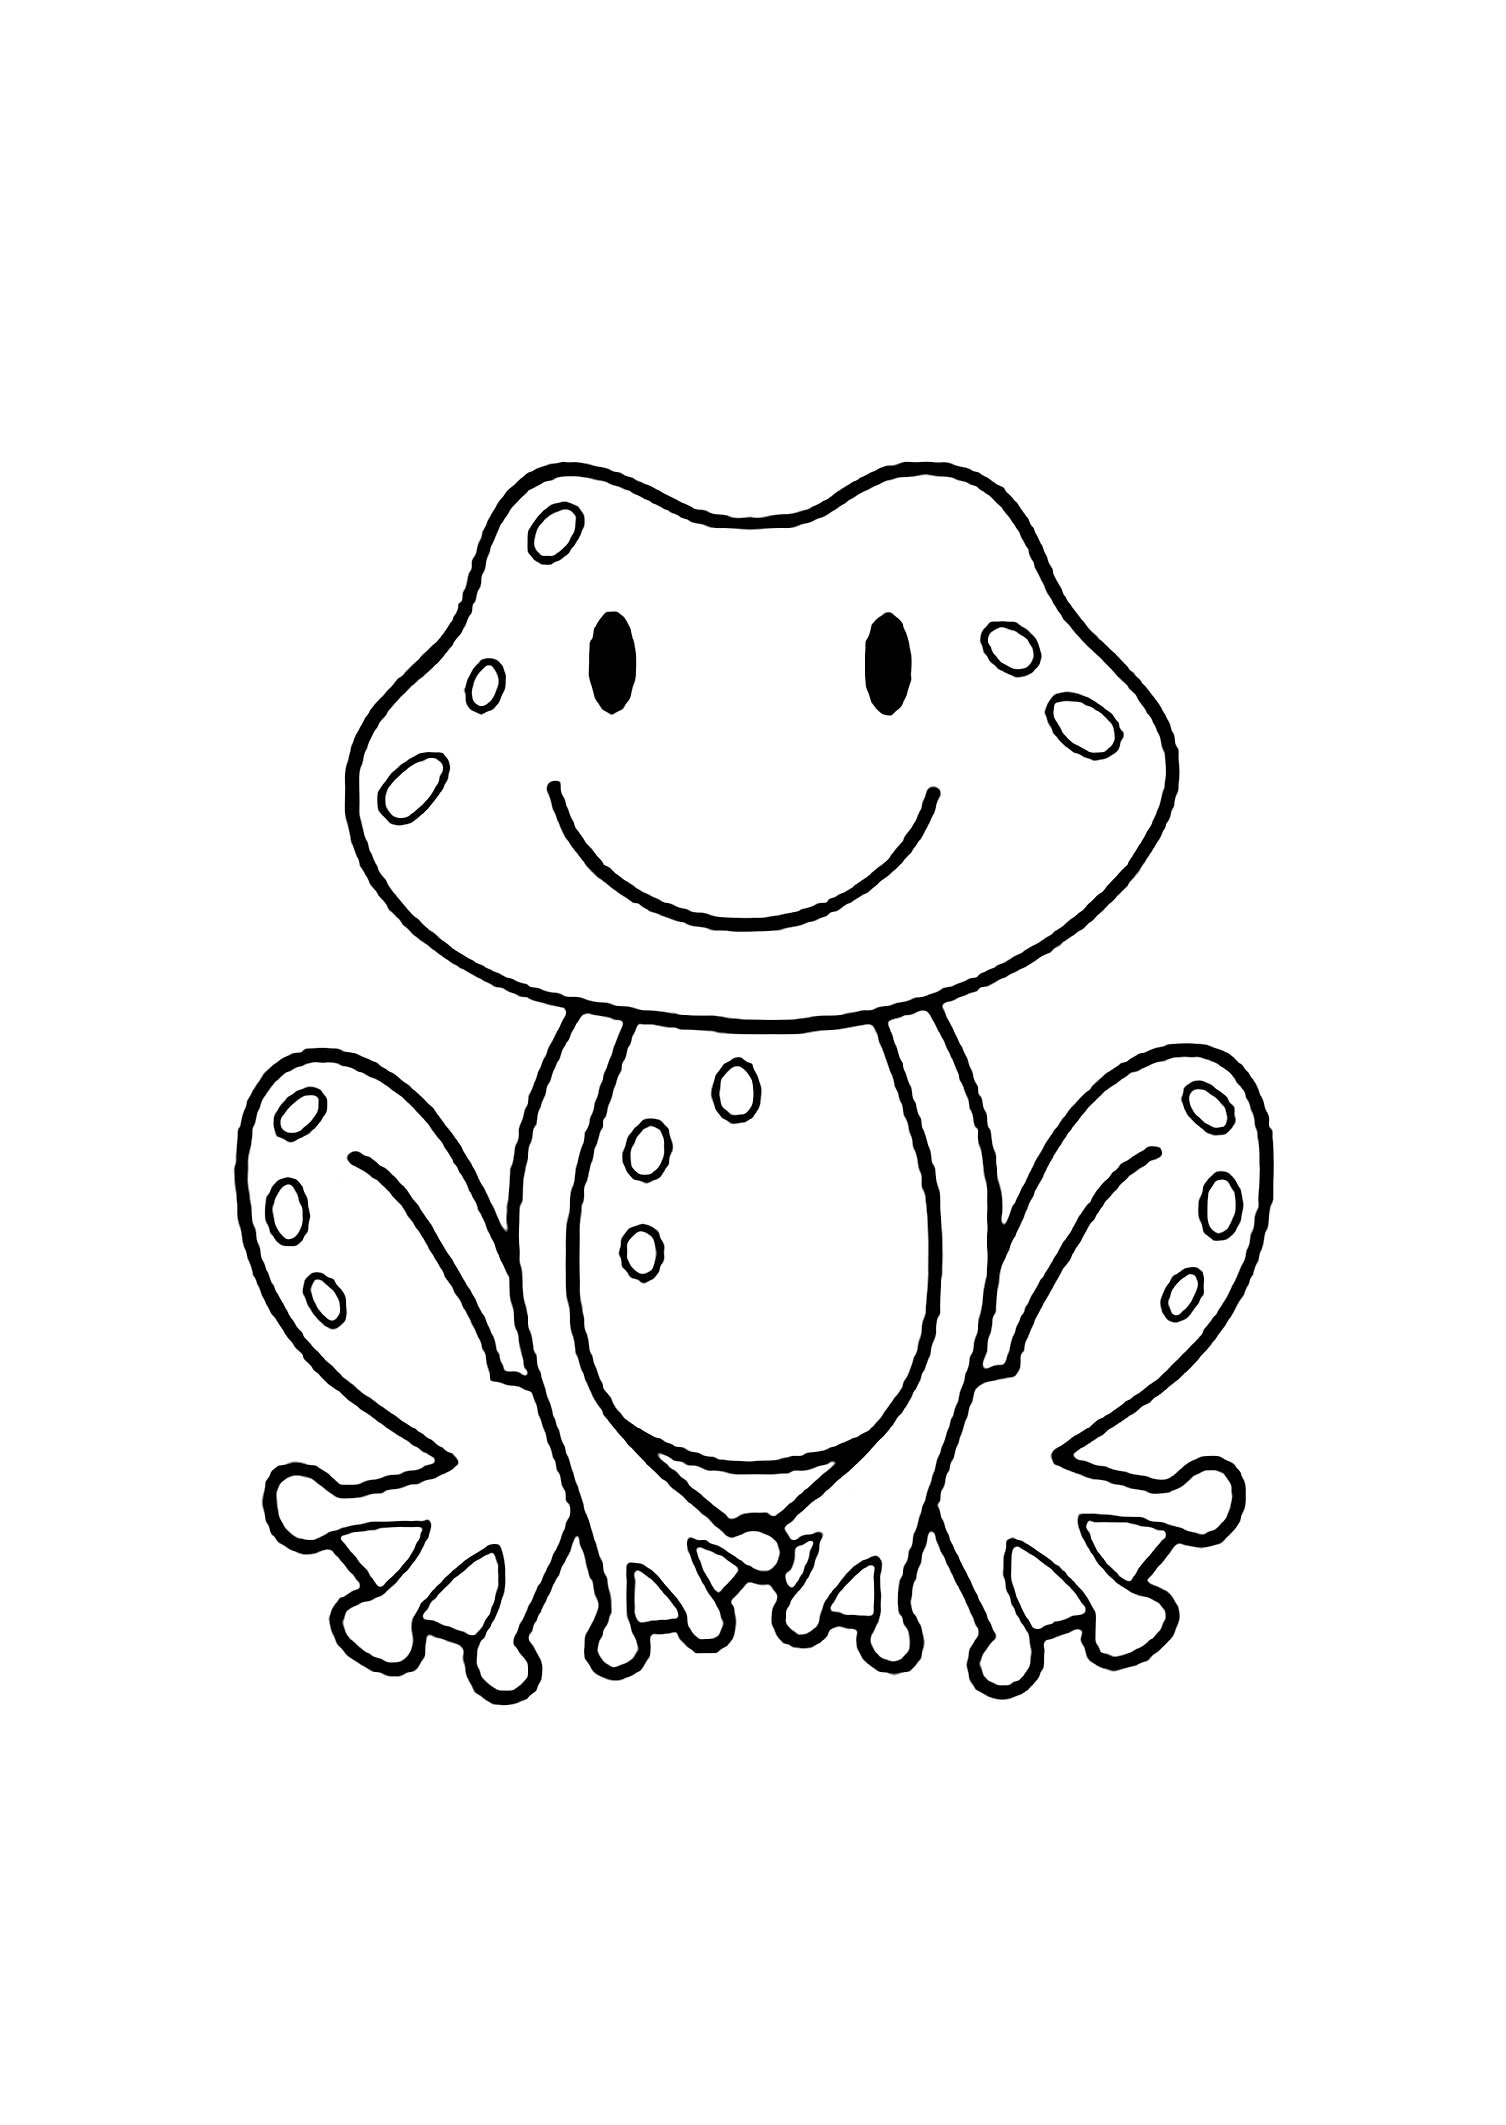 frogs-to-color-for-children-frogs-kids-coloring-pages